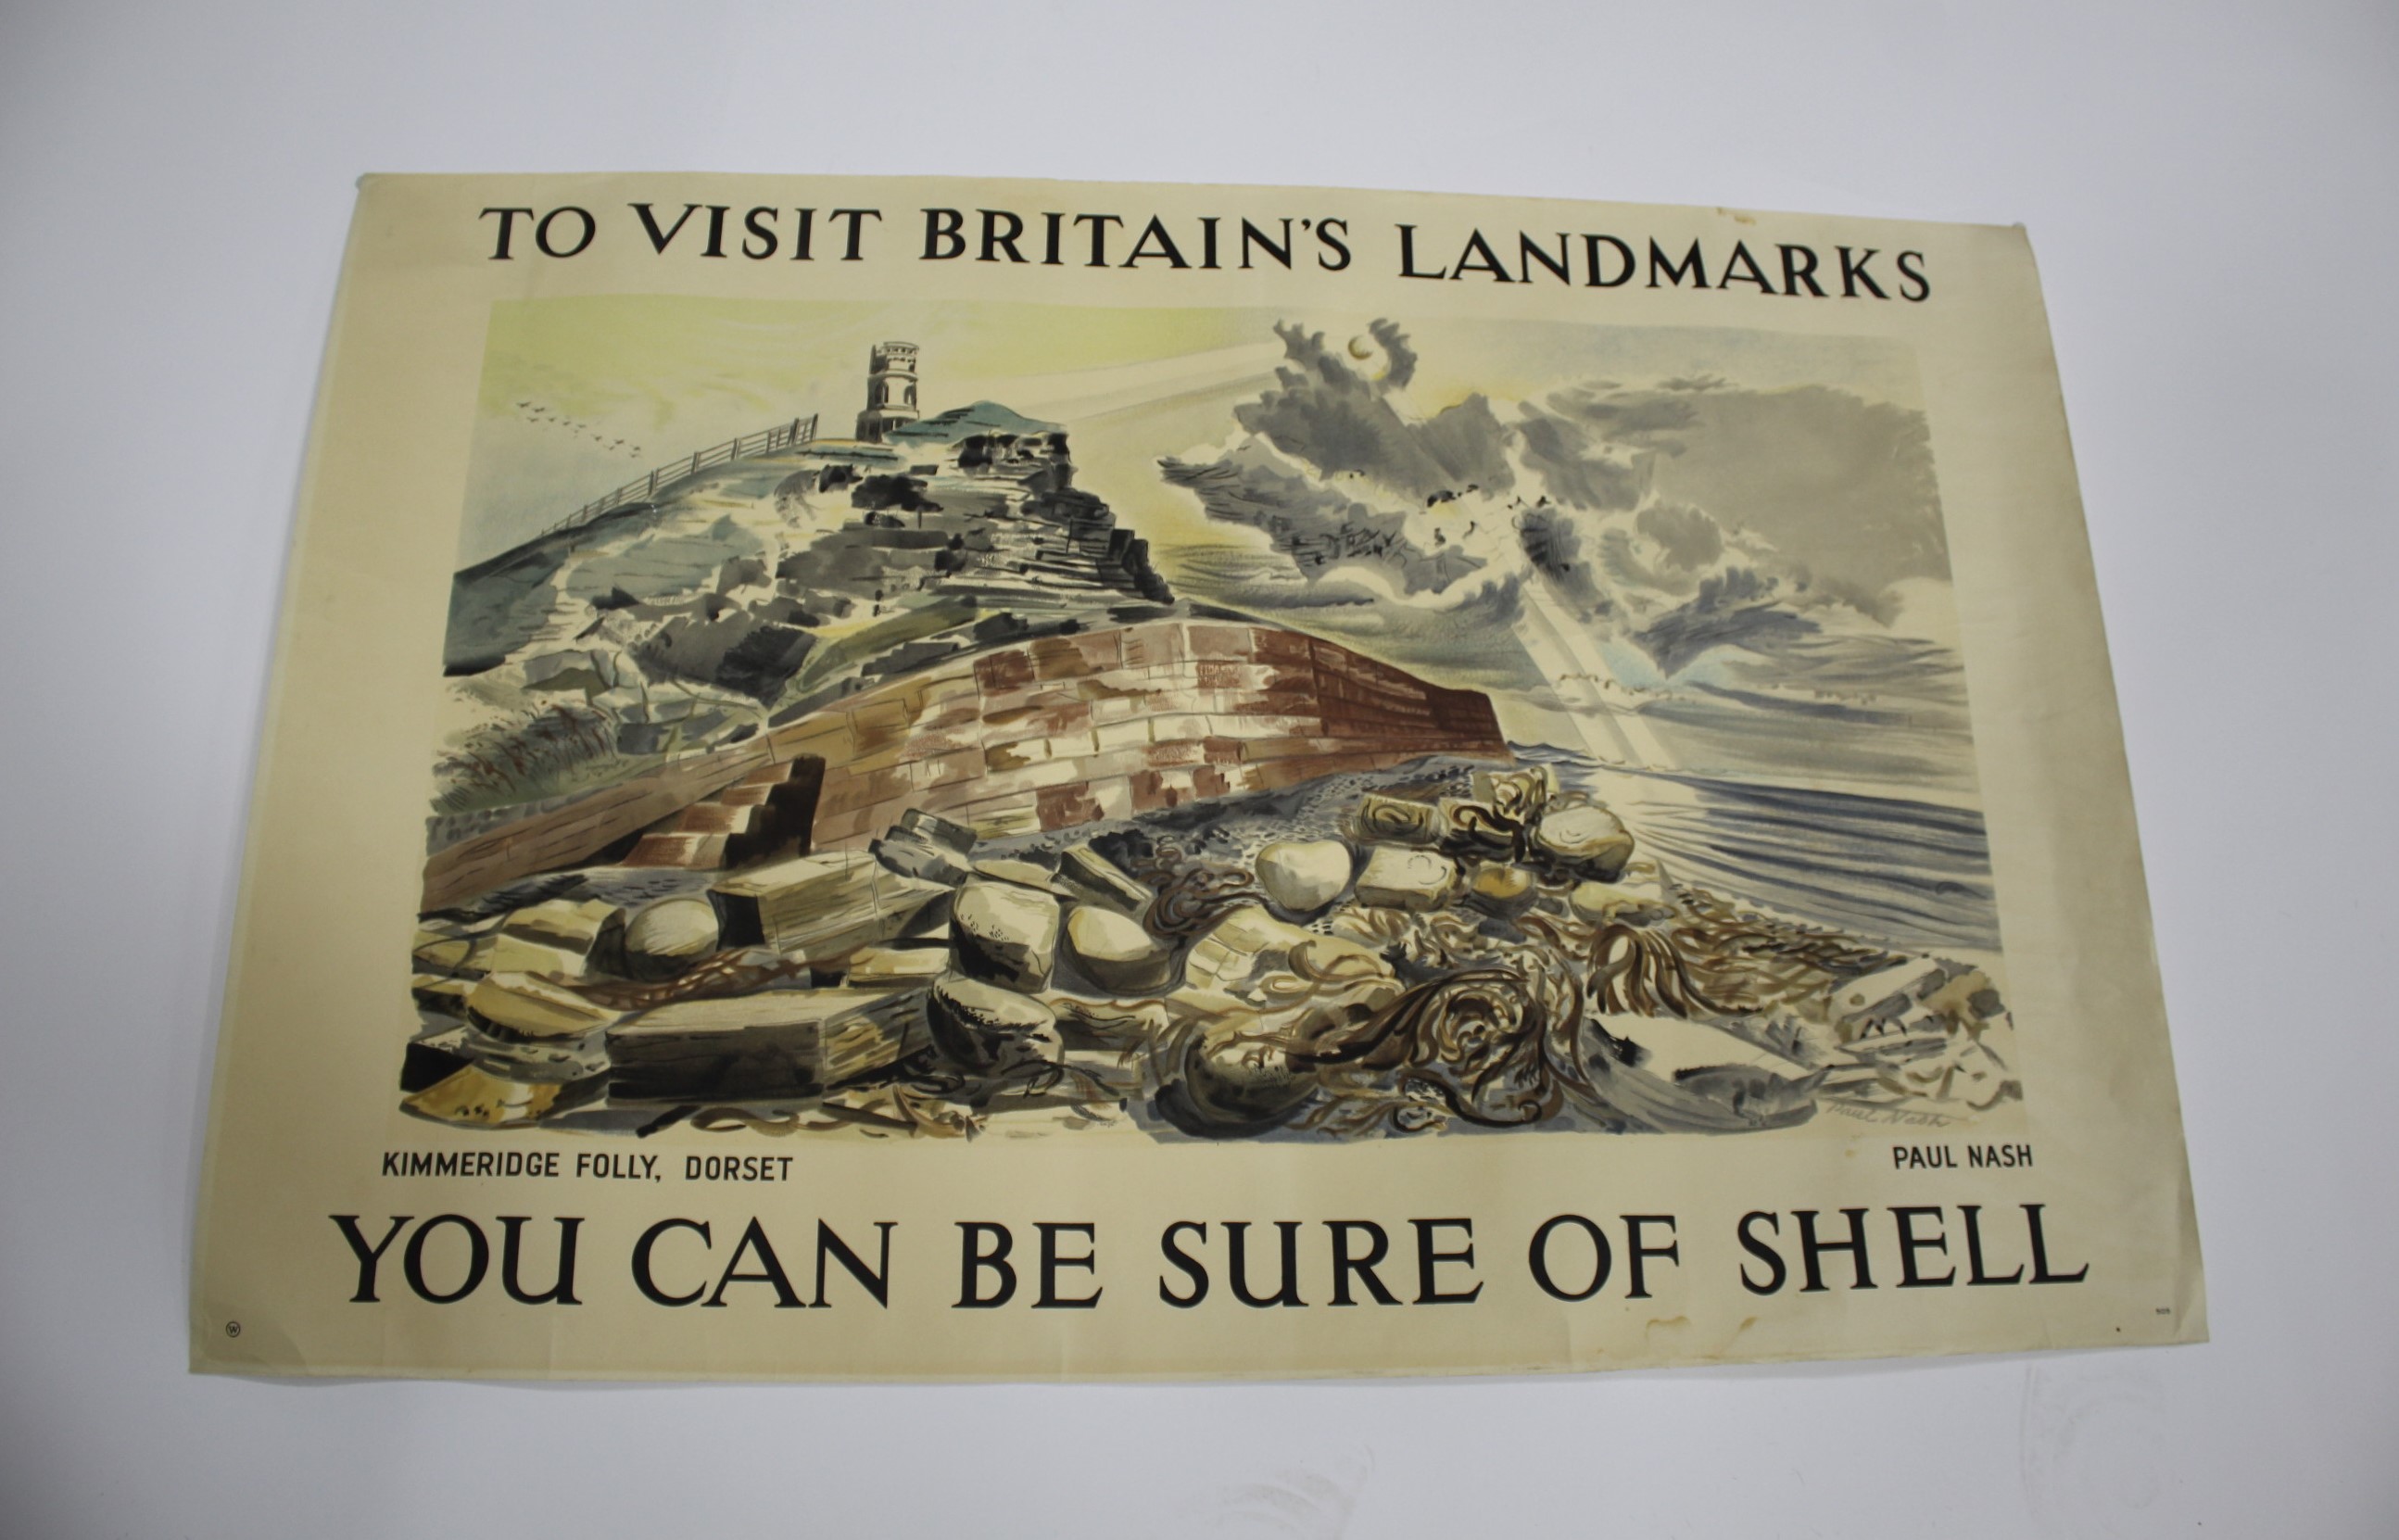 PAUL NASH (1889-1946) - SHELL POSTER 'KIMMERIDGE FOLLY', DORSET a rare lithograph in colours of - Image 7 of 7